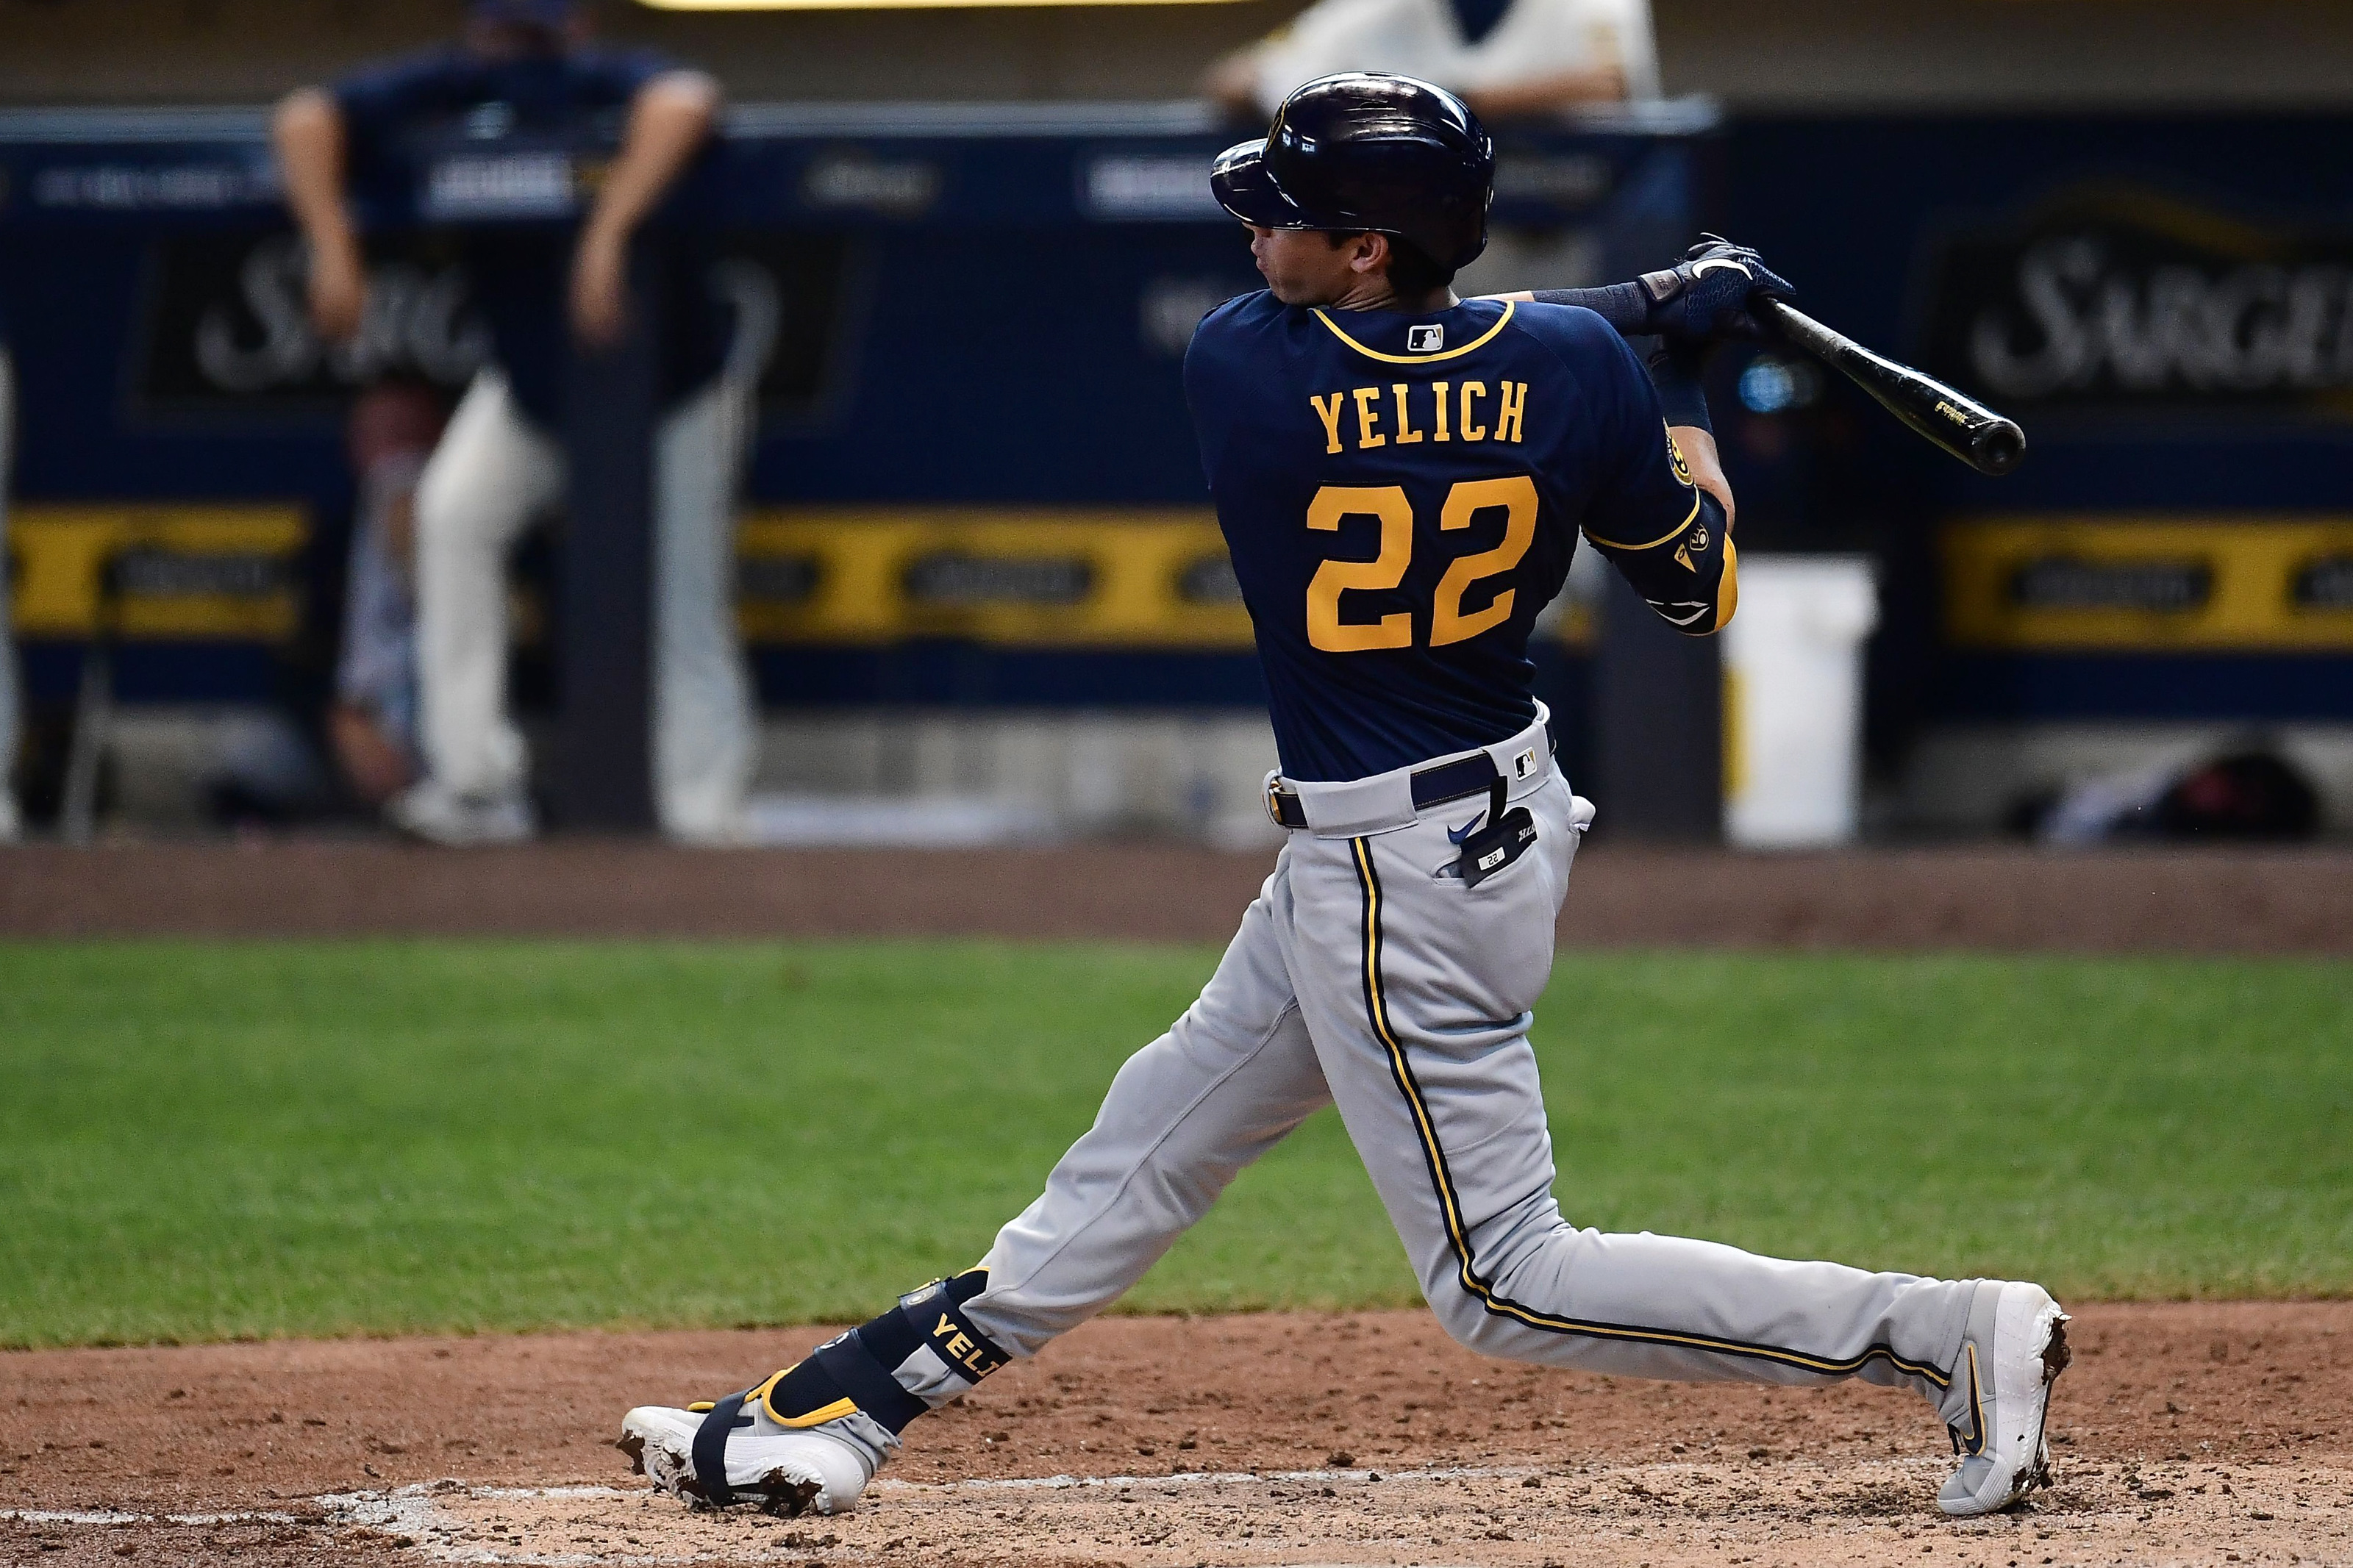  Christian Yelich: The Inspiring Story of One of